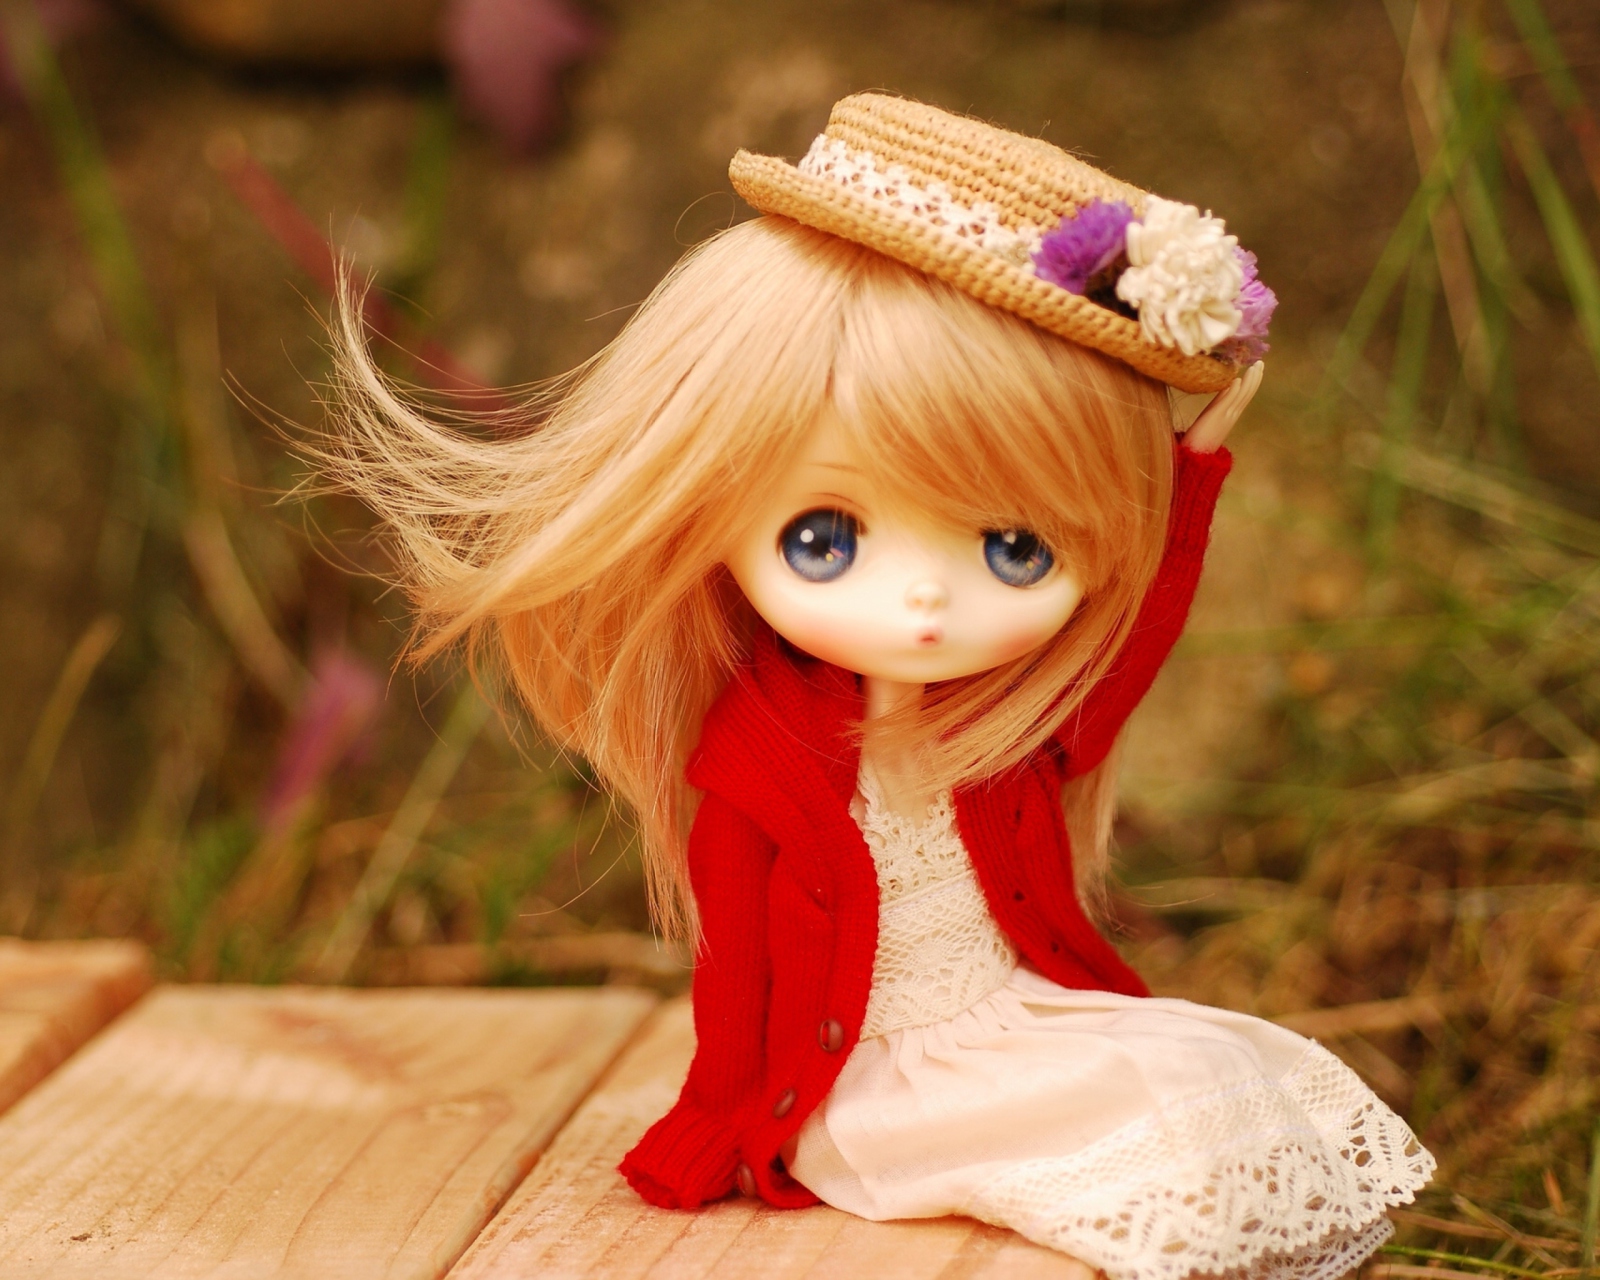 Blonde Doll In Romantic Dress And Hat screenshot #1 1600x1280